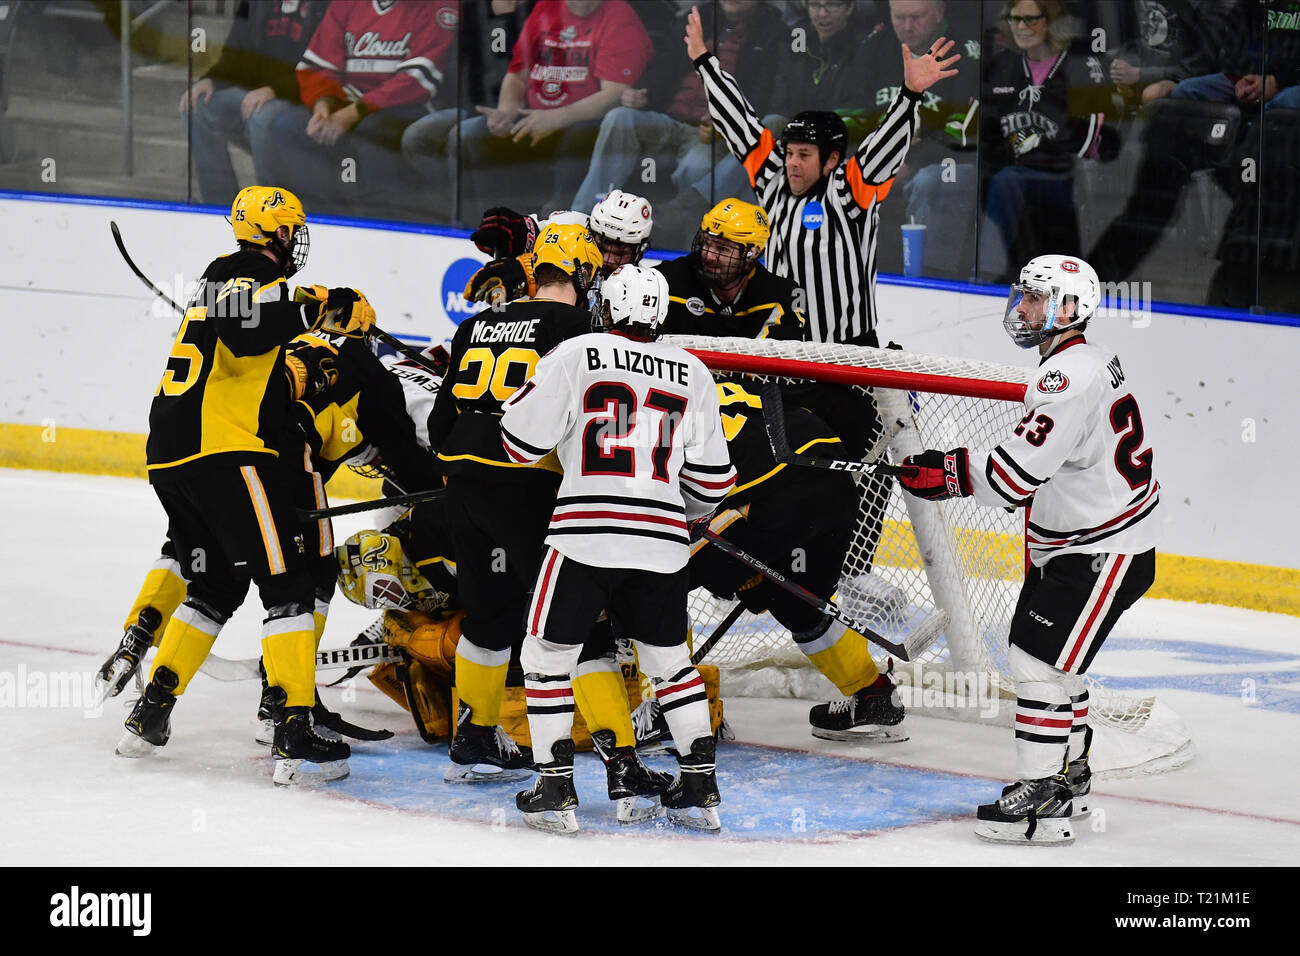 March 29, 2019 Play is stopped by the referee during the NCAA Men's Hockey West Regional semi-final game between the American International College Yellow Jackets and the St. Cloud State Huskies at Scheels Arena, Fargo, ND. #16 AIC defeated #1 SCSU 2-1. Photo by Russell Hons/CSM Stock Photo